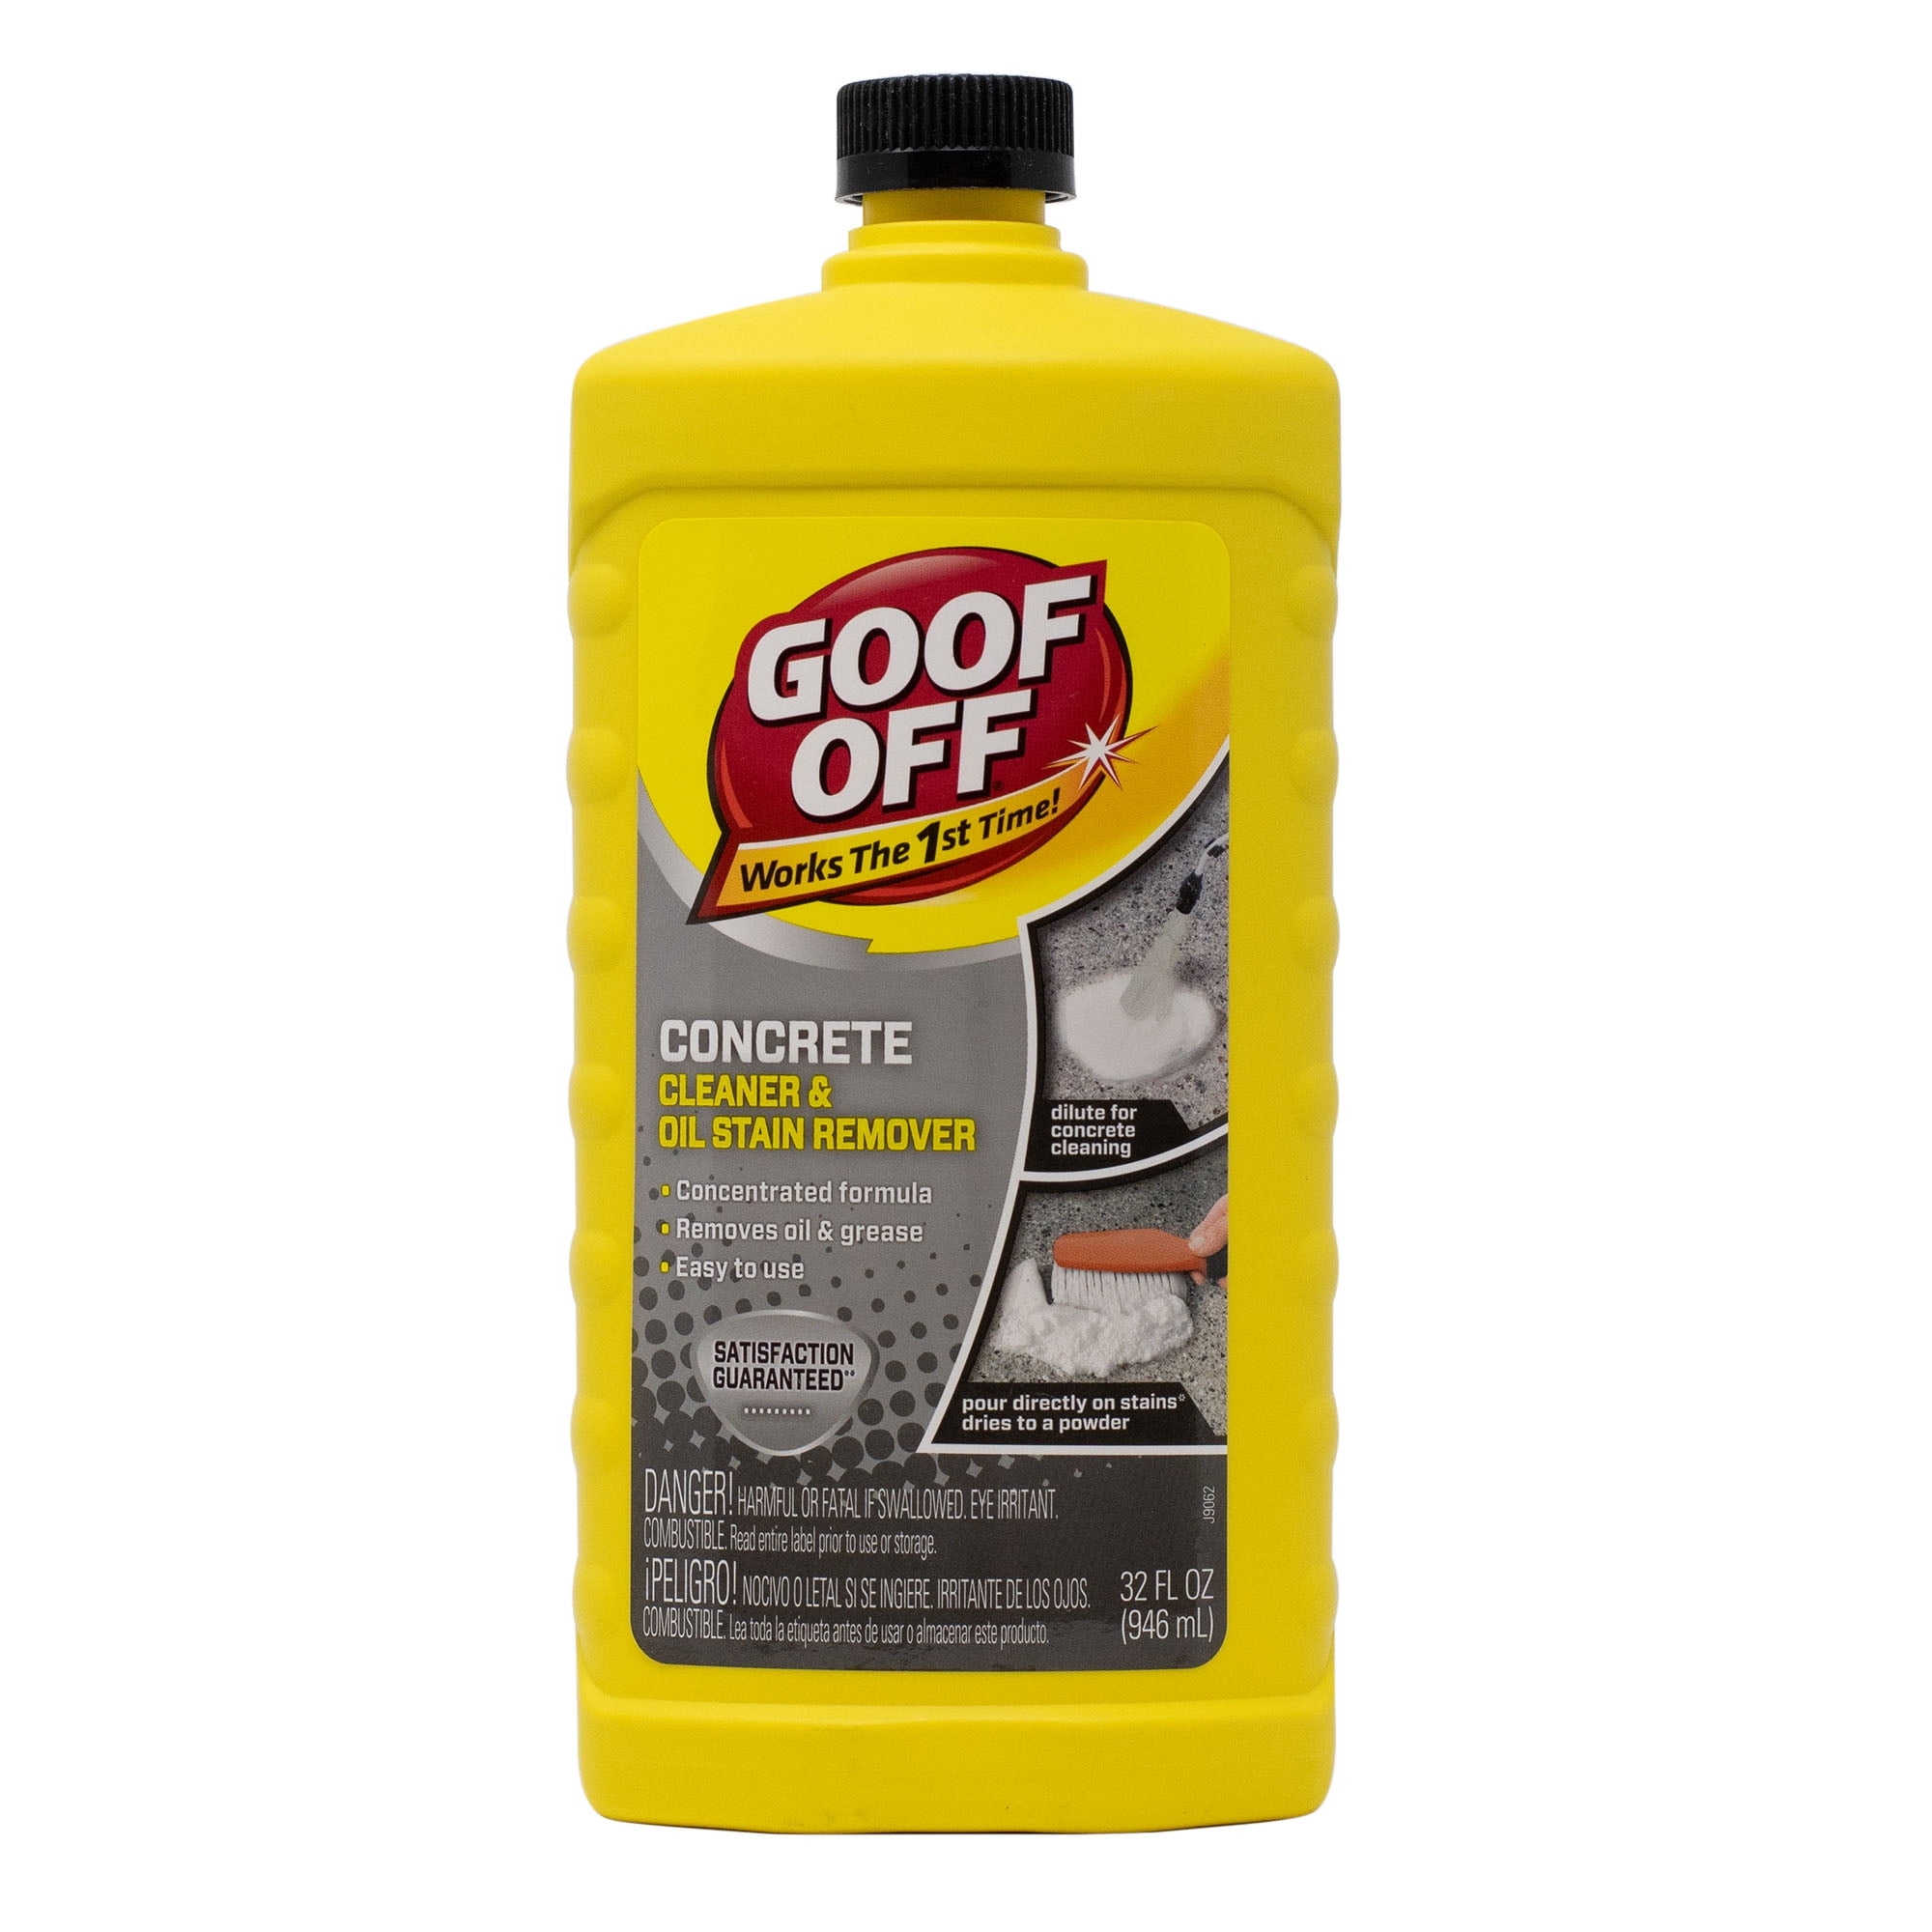 Goof Off Concrete Cleaner and Oil Stain Remover - 28 oz. Bottle